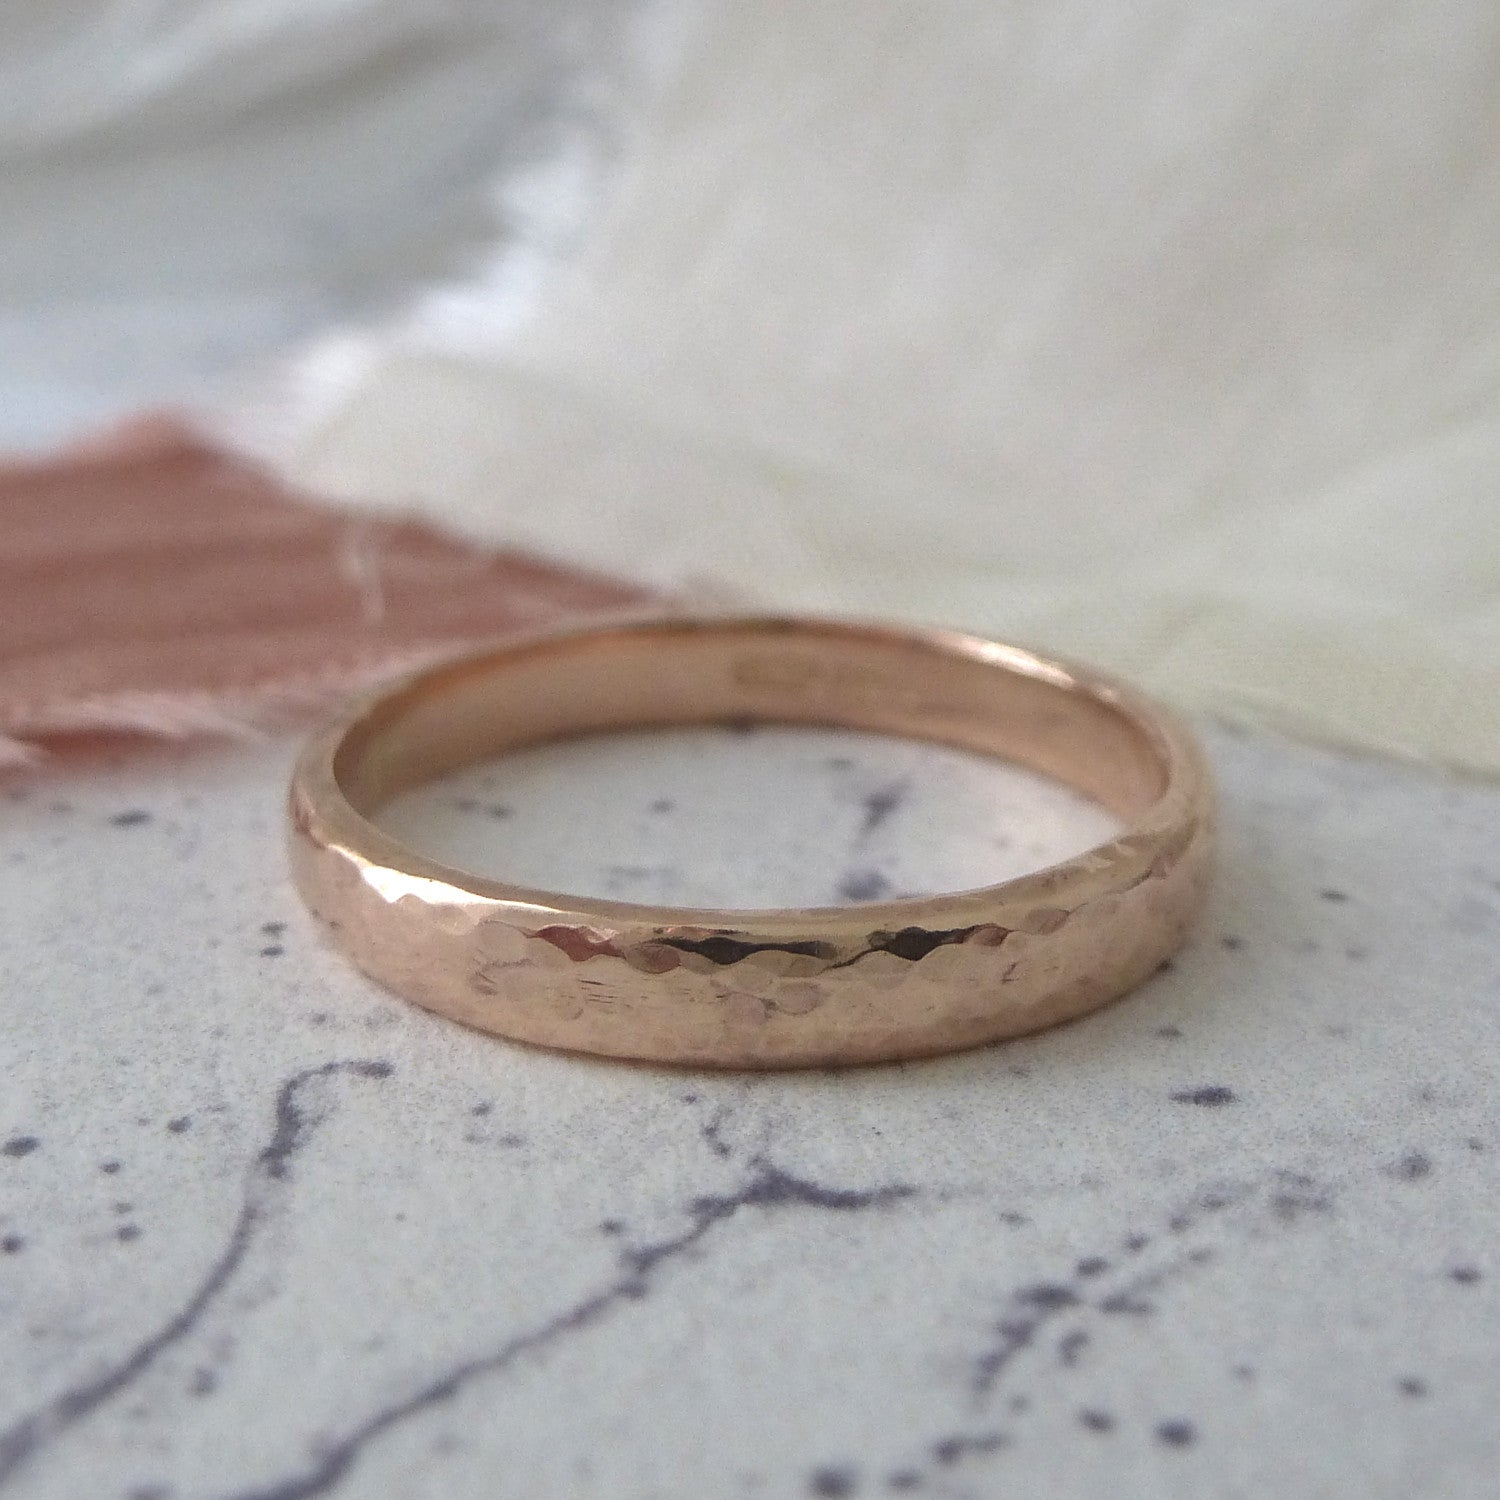 3mm hammered band in 9ct rose gold, recycled gold